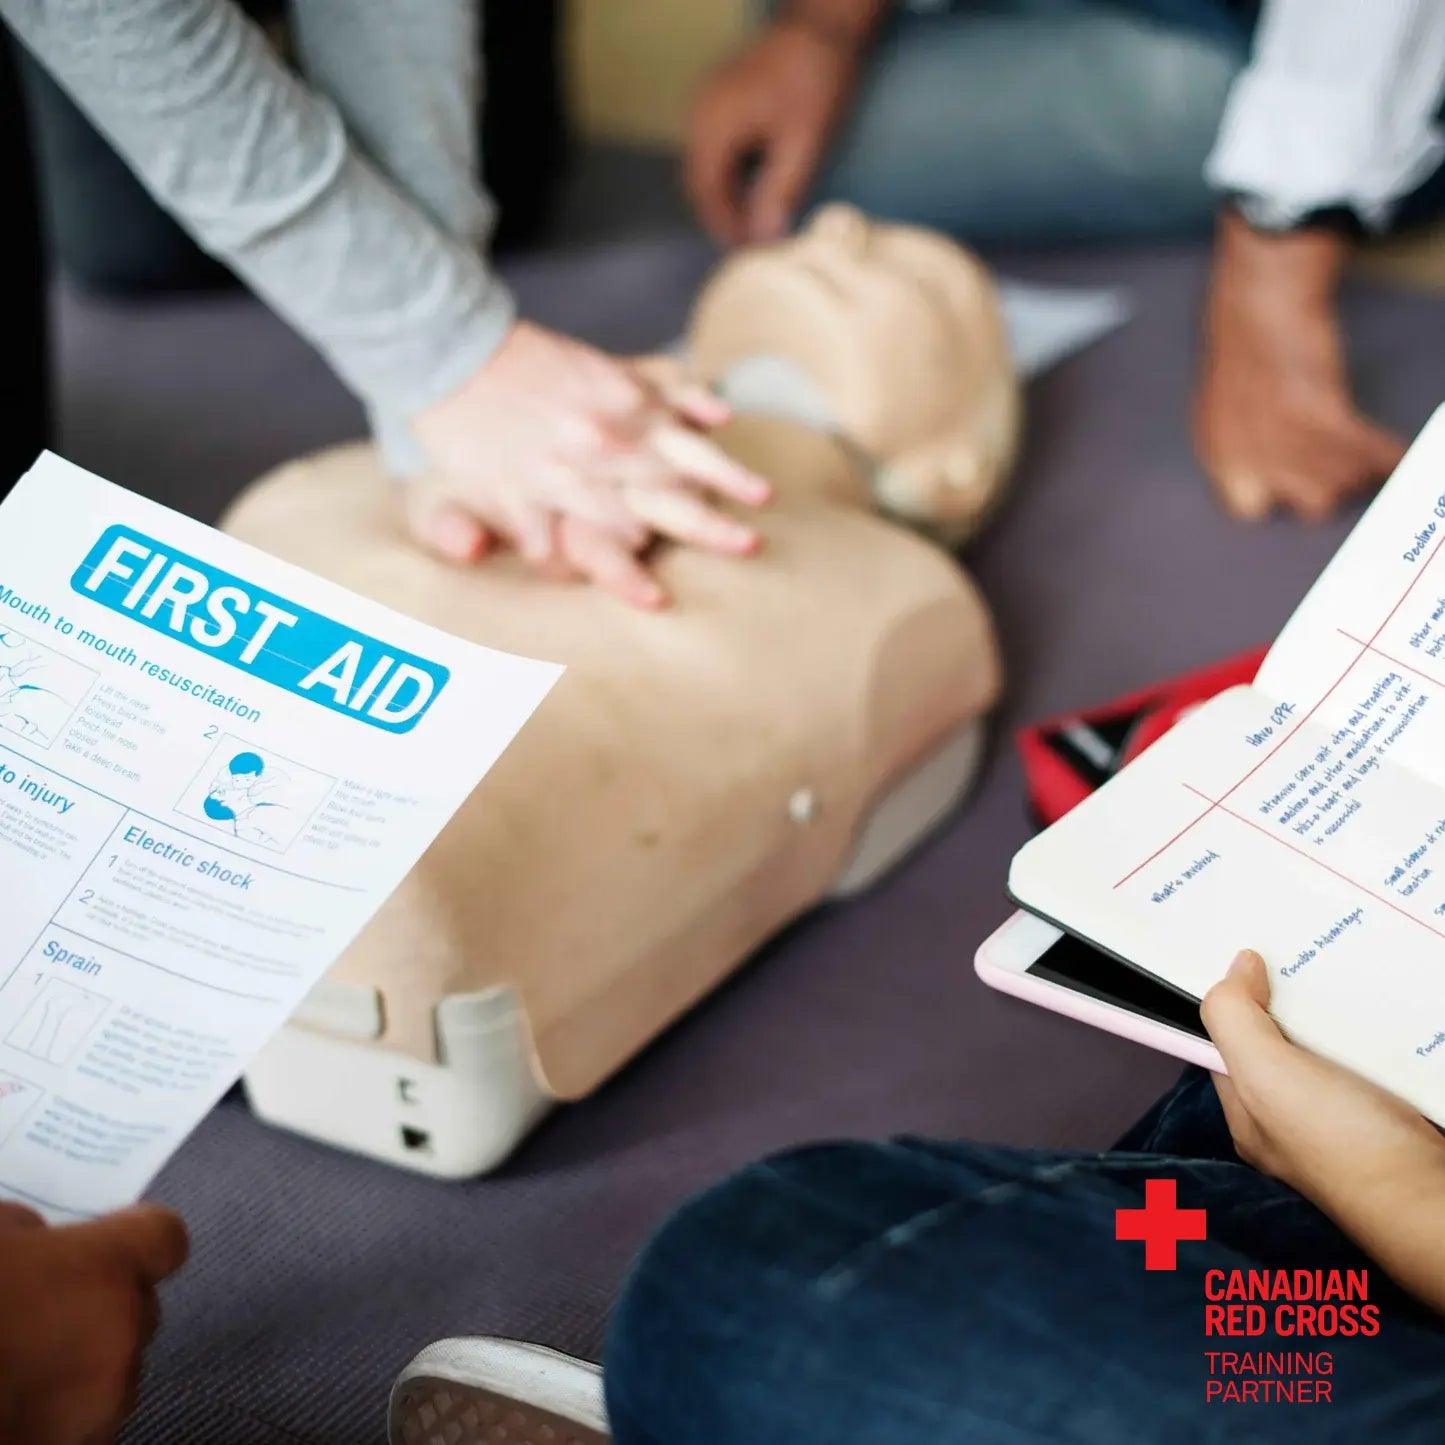 Standard First Aid (SFA) Course by the Canadian Red Cross